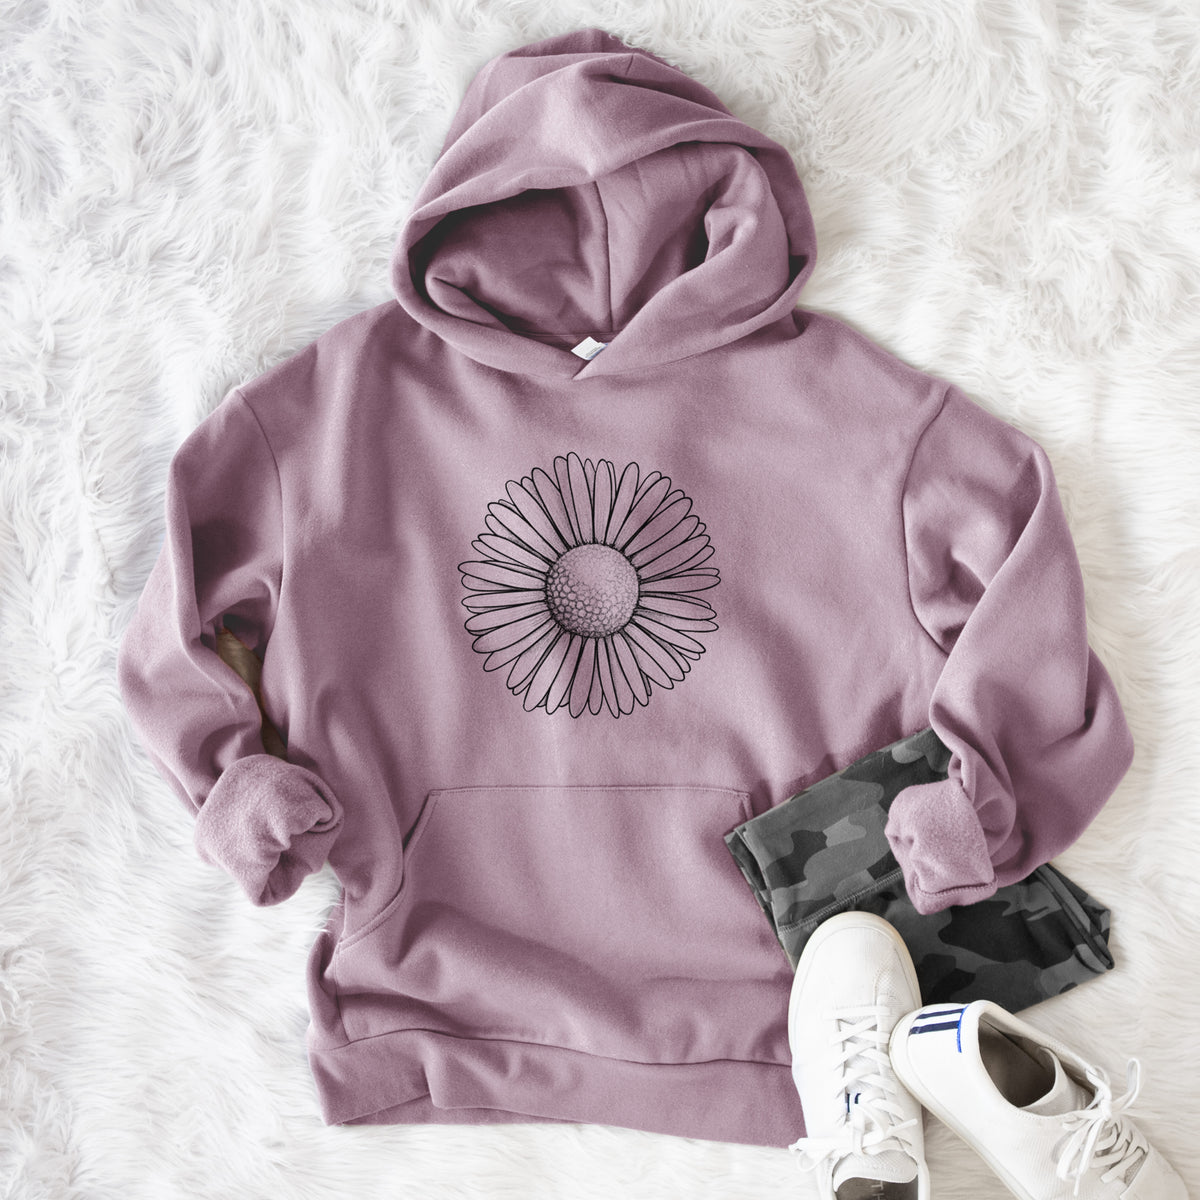 Bellis perennis - The Common Daisy  - Bodega Midweight Hoodie